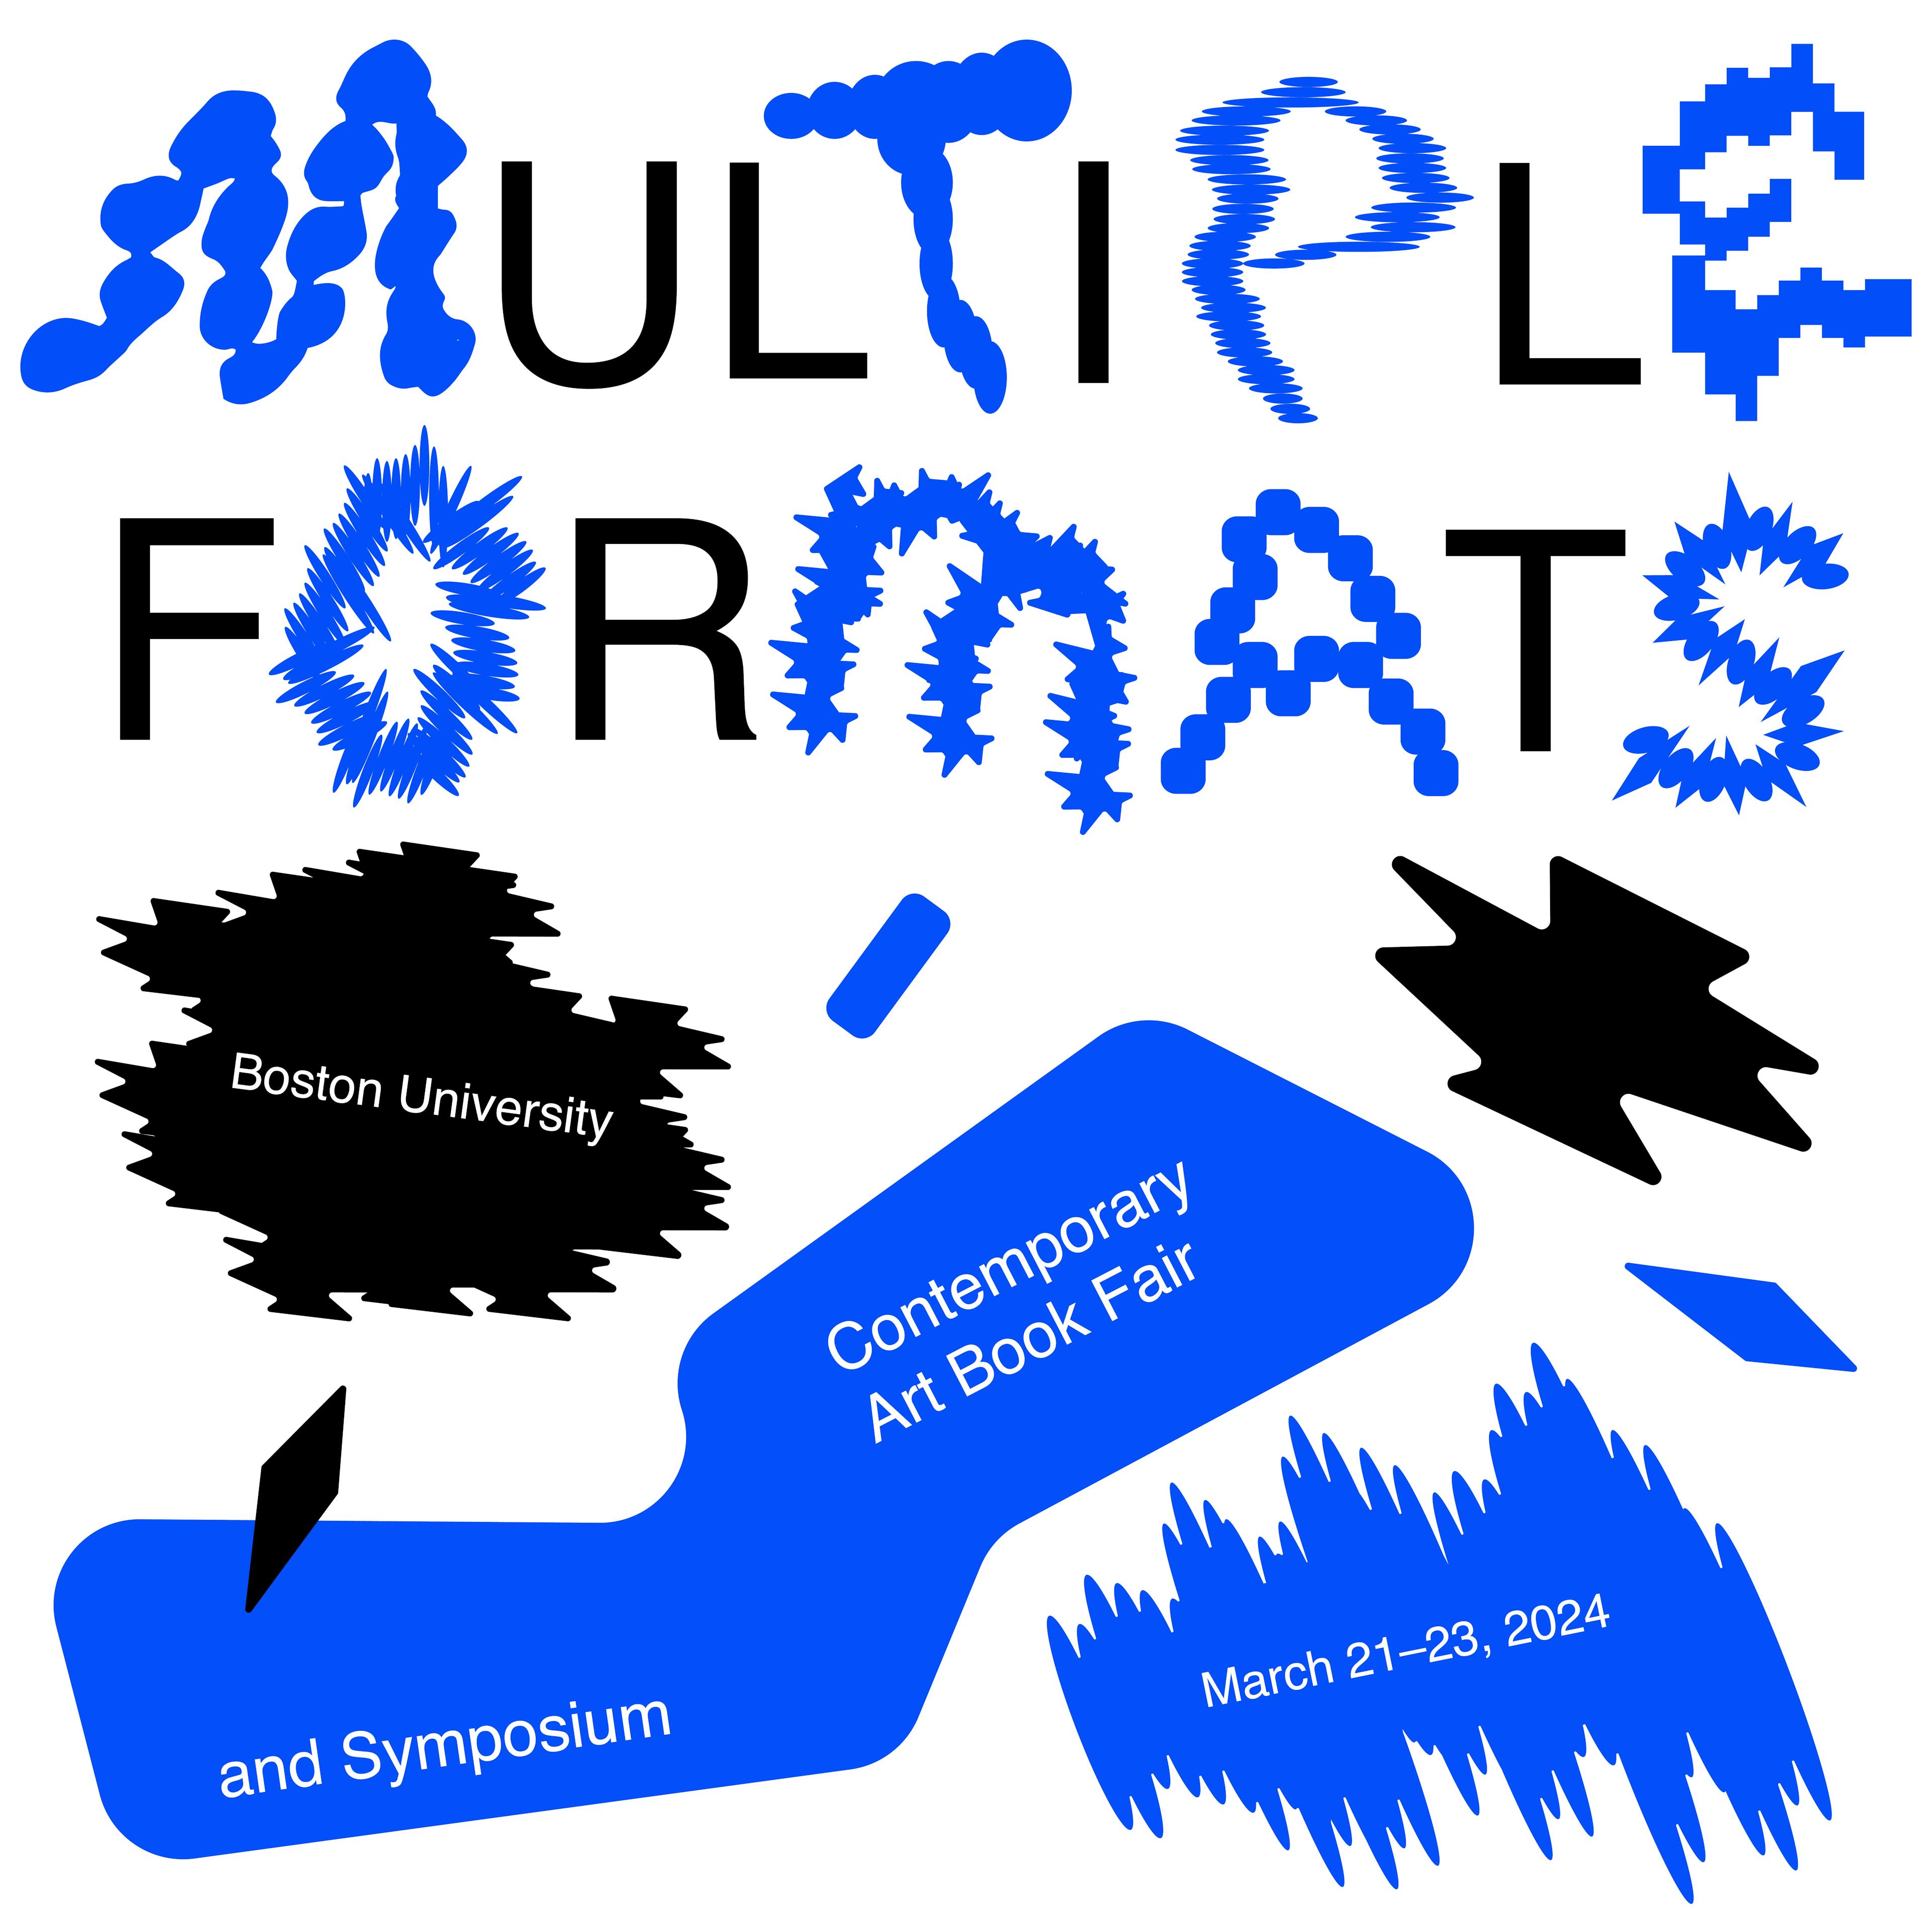 A white, black, and blue advertisement for the 2024 Multiple Formats Contemporary Art Book Fair and Symposium, held at Boston University from March 21st through the 23rd.